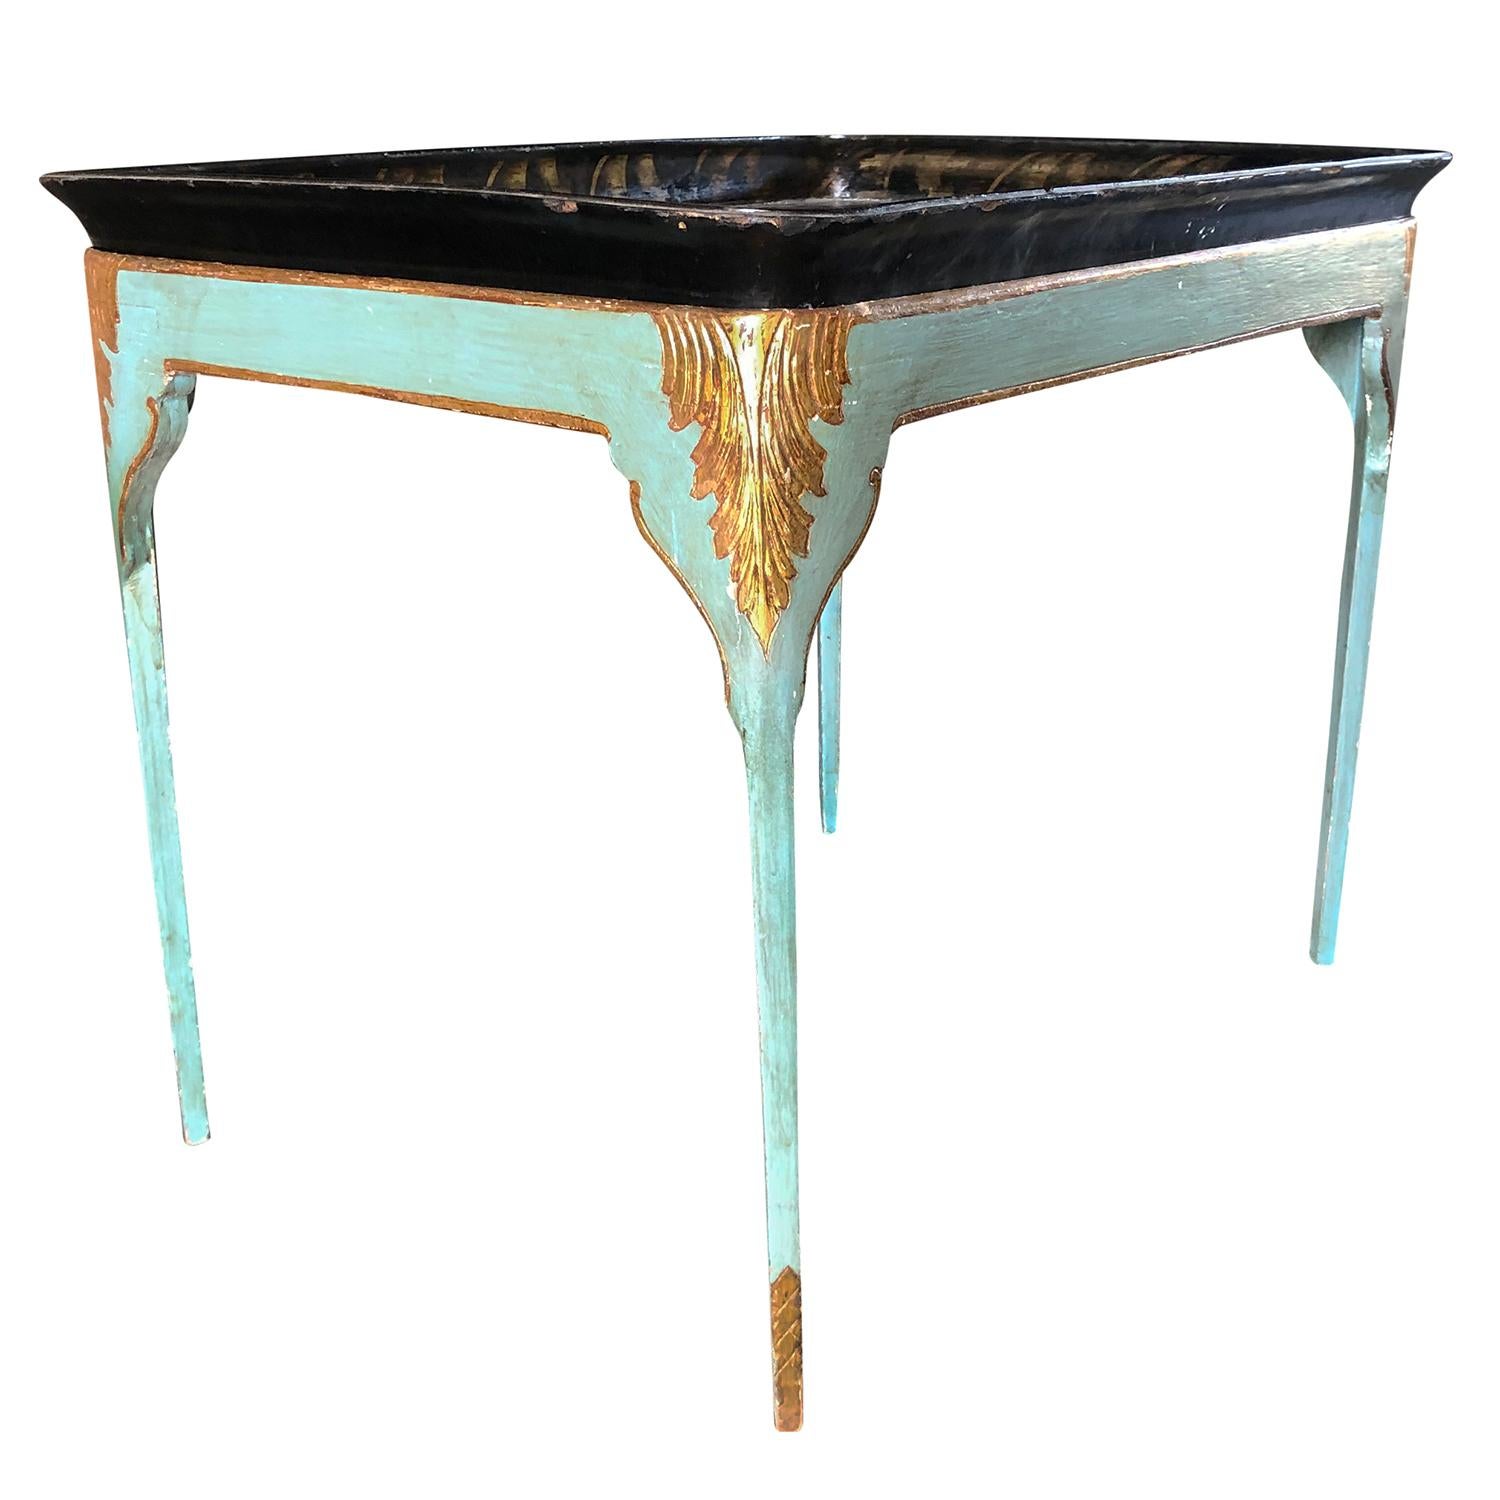 An antique Swedish Gustavian tray table in old paint and gilded colored Acanthus leaves on all sides with removable tray. The black-turquoise Scandinavian side table is made of hand crafted painted Pinewood, in good condition. Minor fading,